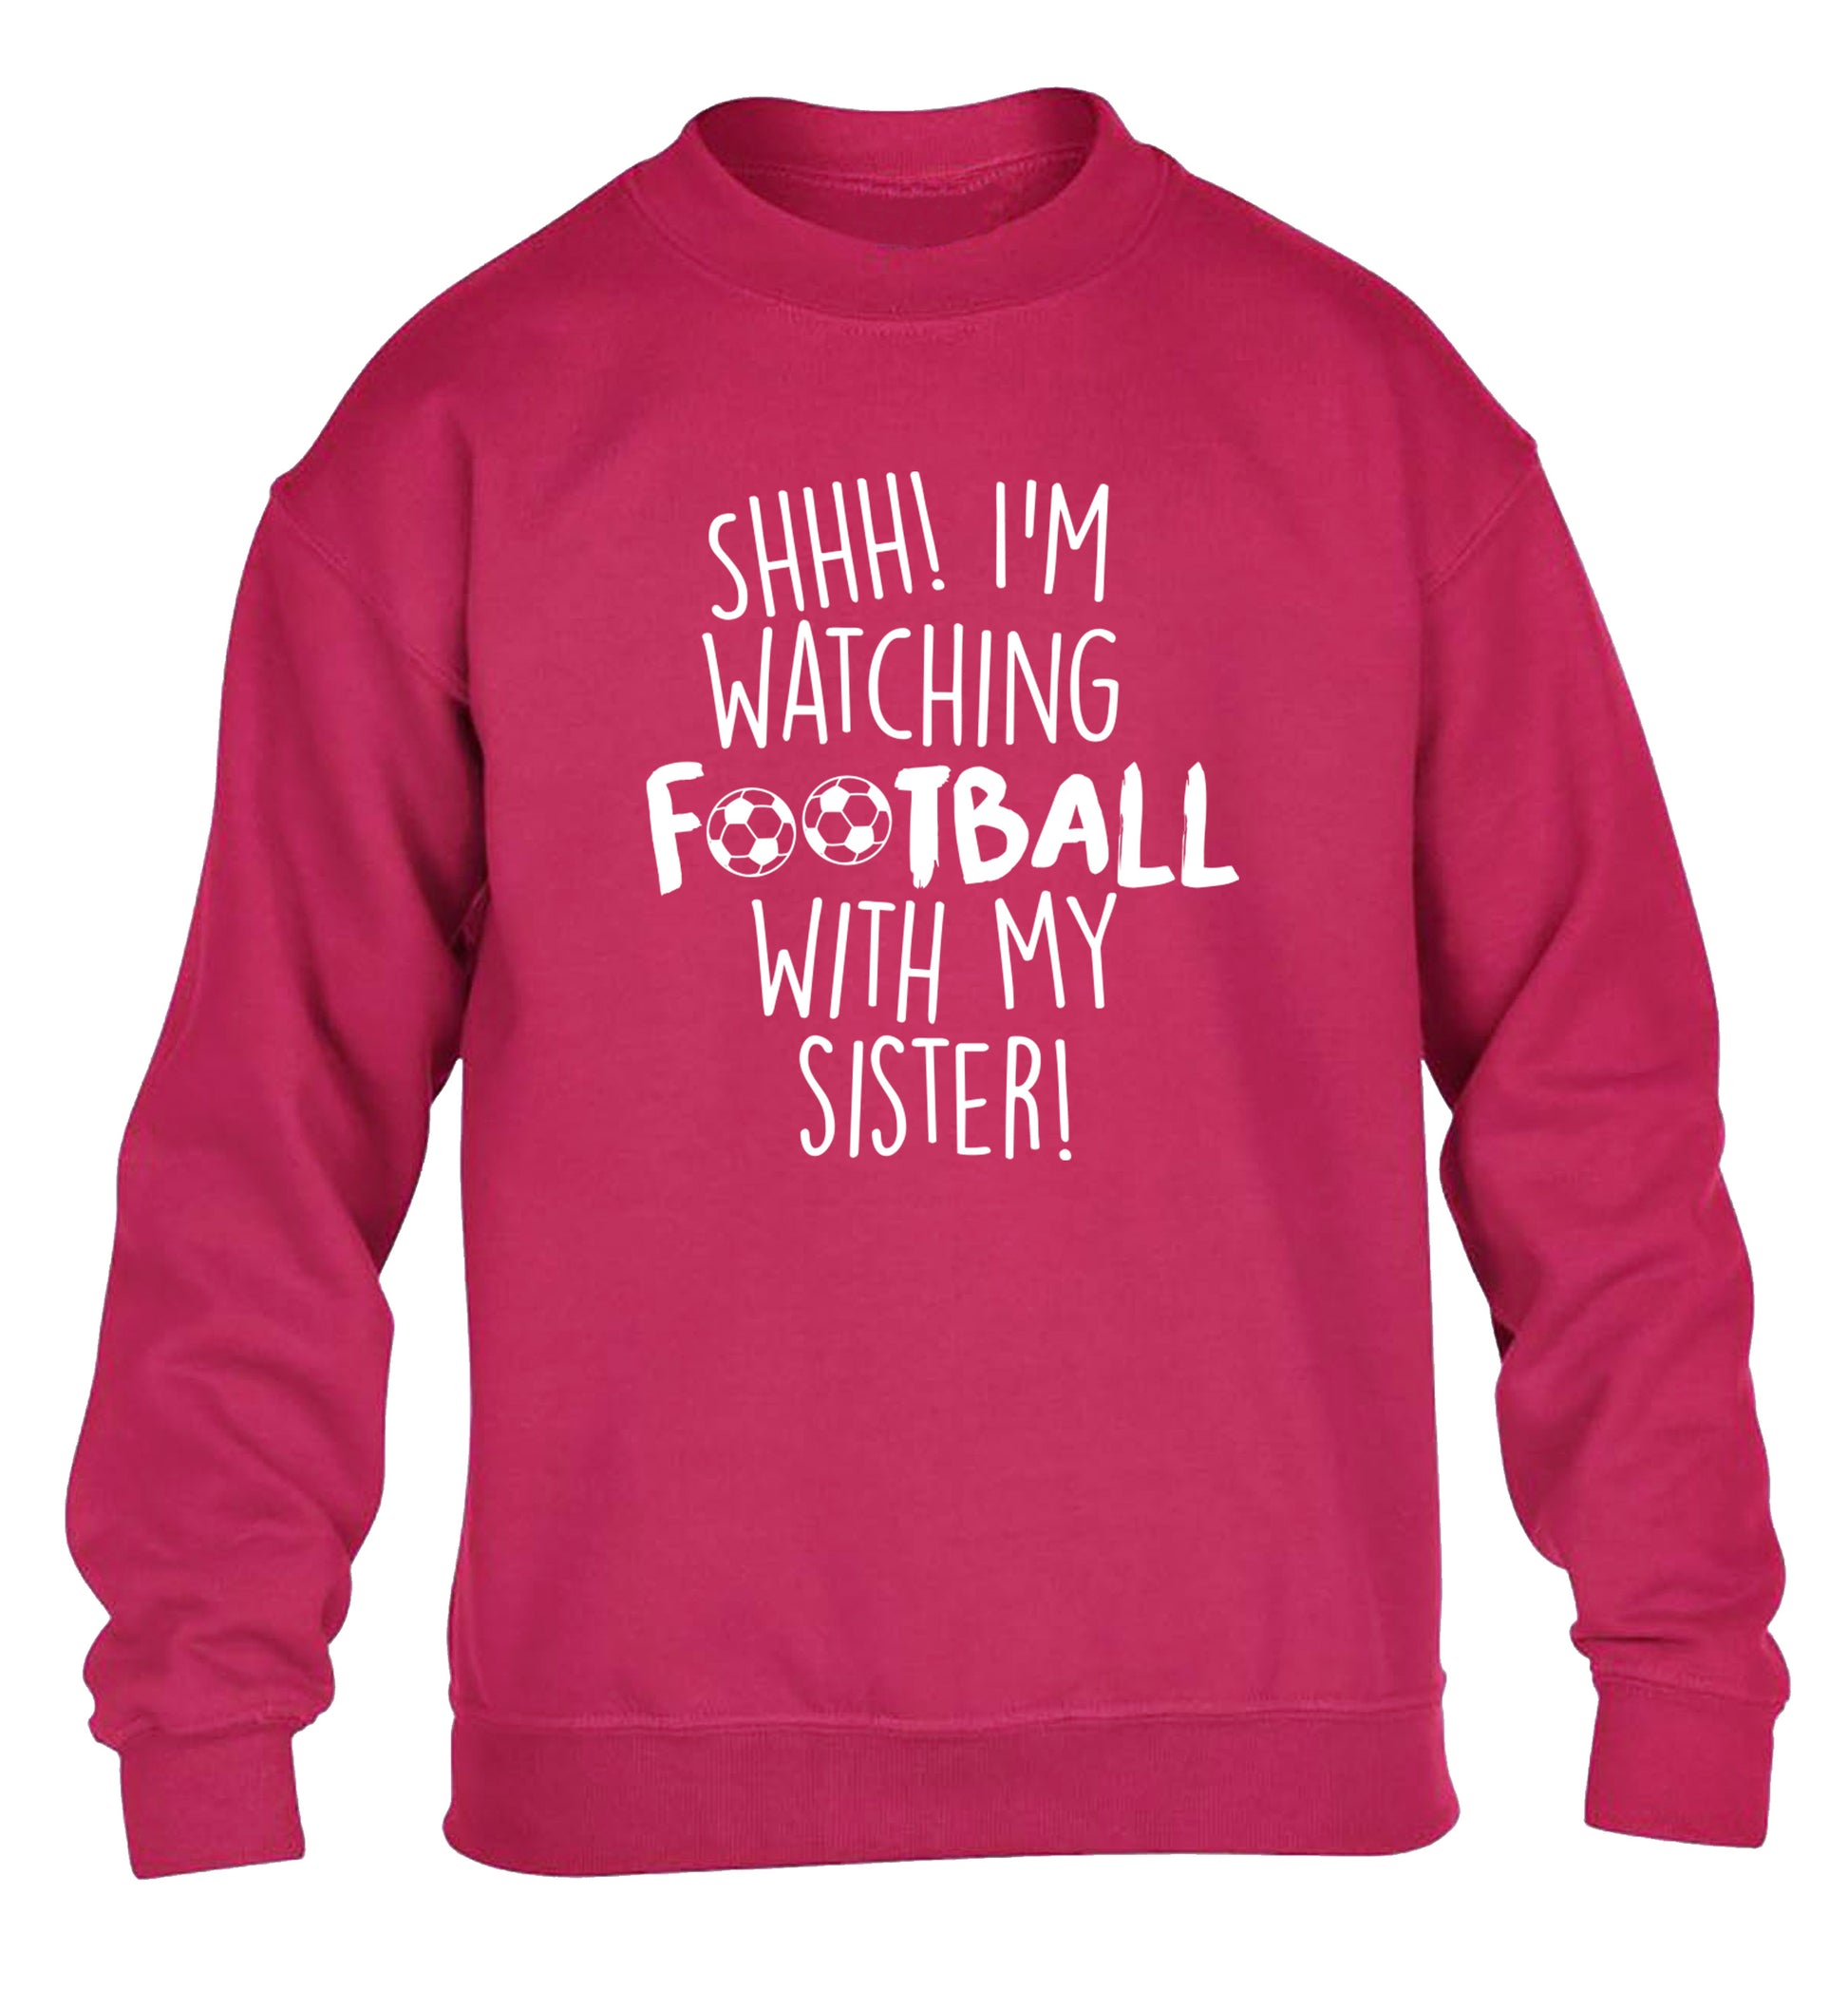 Shhh I'm watching football with my sister children's pink sweater 12-14 Years